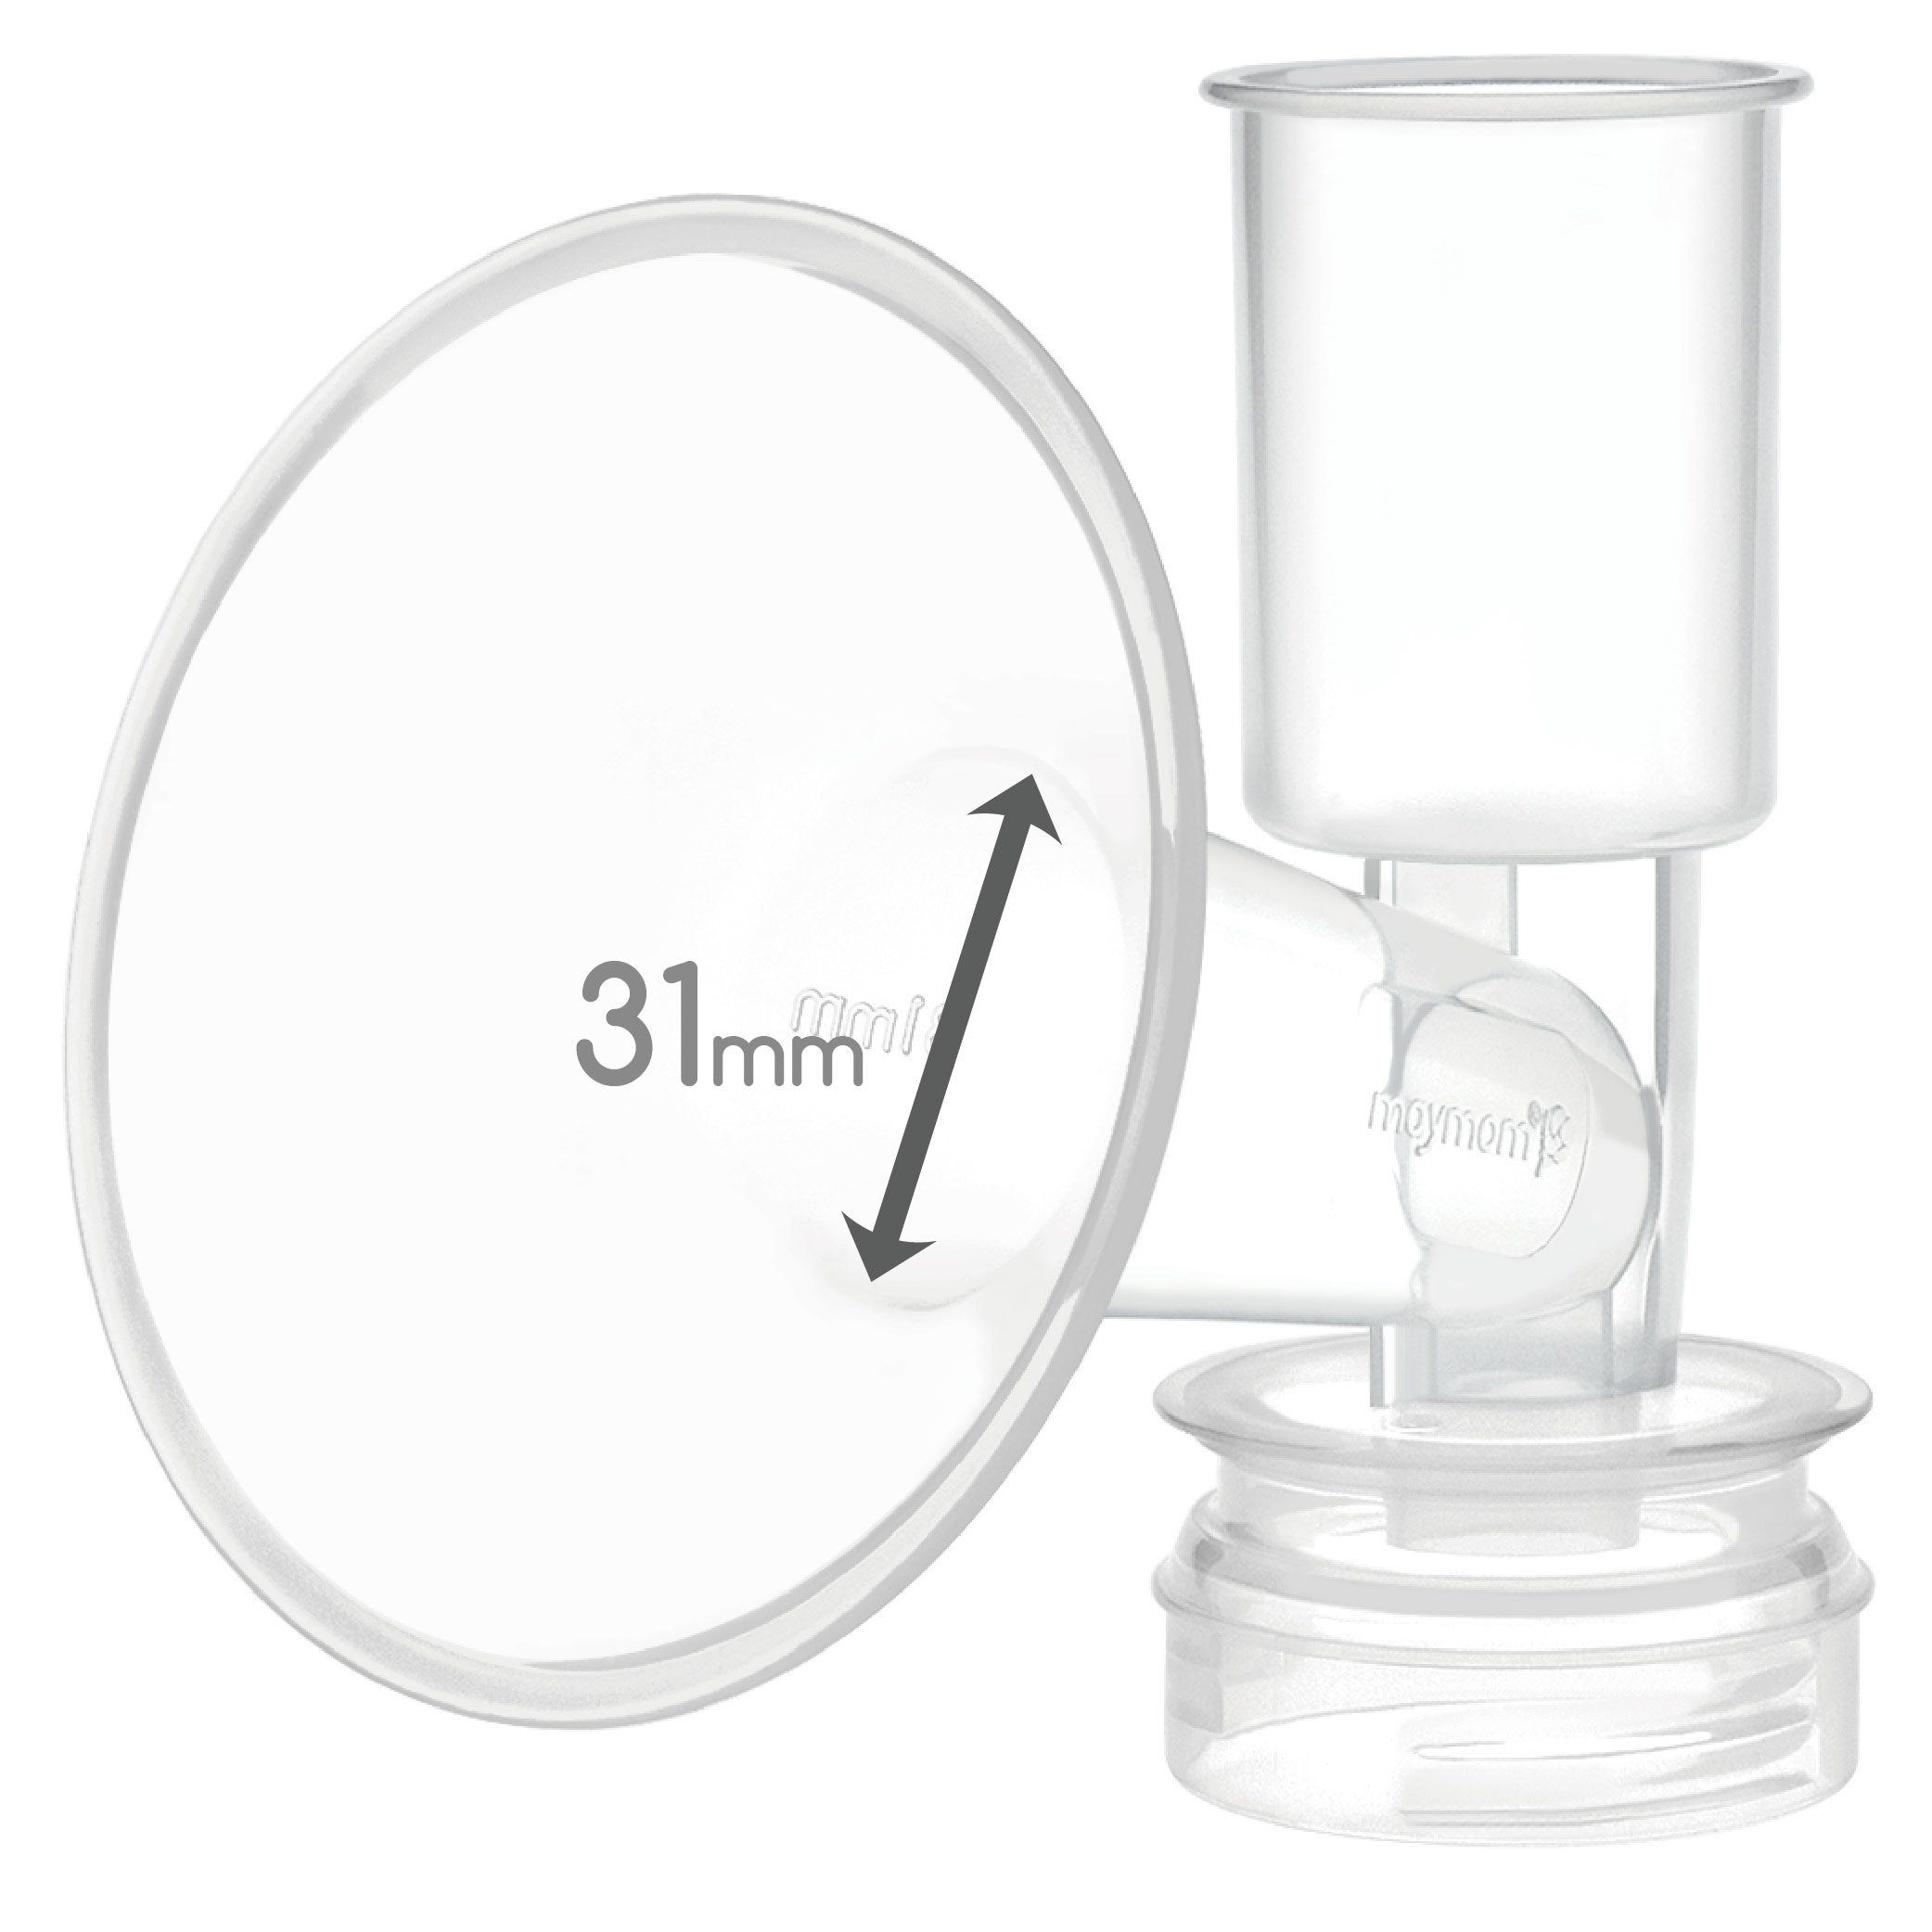 Maymom Breast Shield Flange Compatible with Ameda Breast Pumps (31mm, 1-Piece)